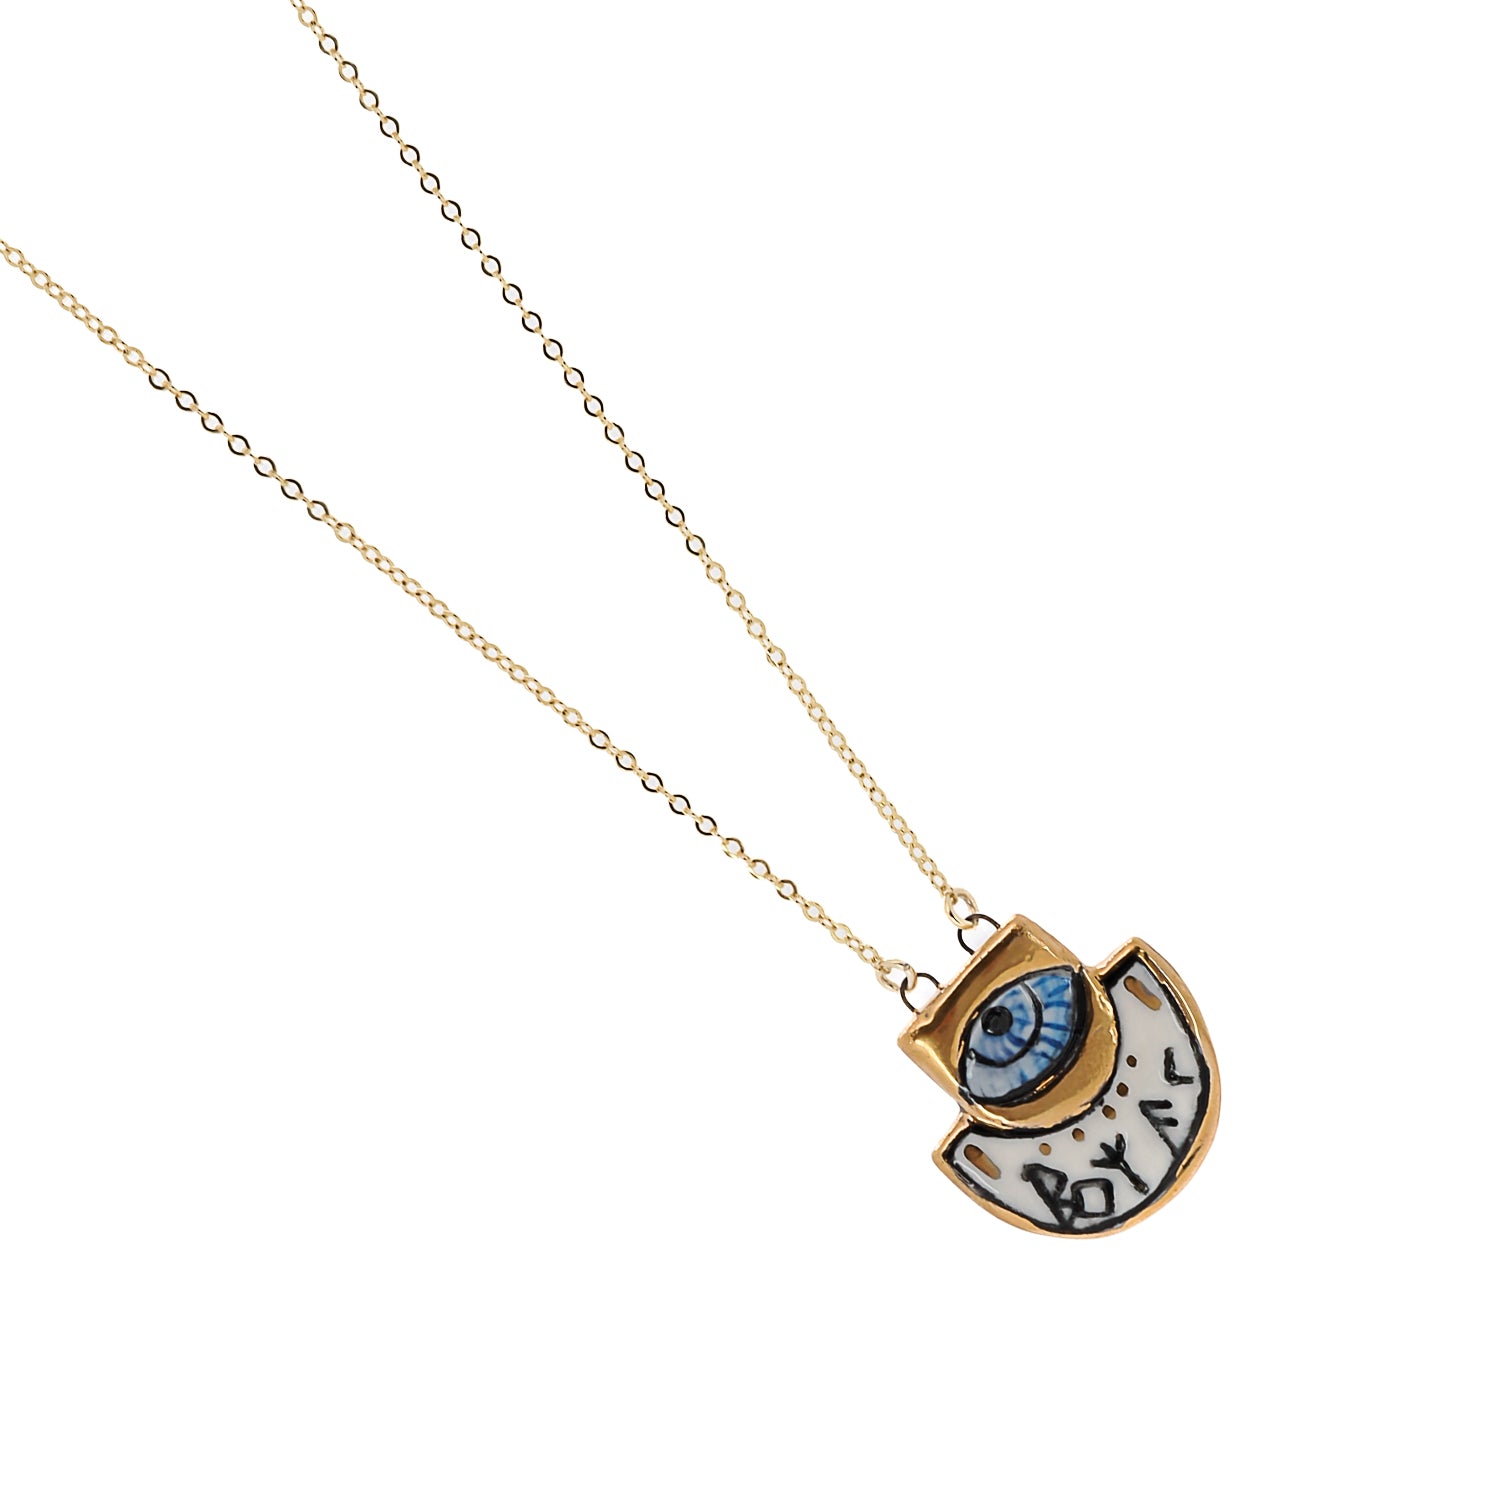 Ancient Wisdom and Power - The necklace features magical Norse Runes symbols for guidance and protection.